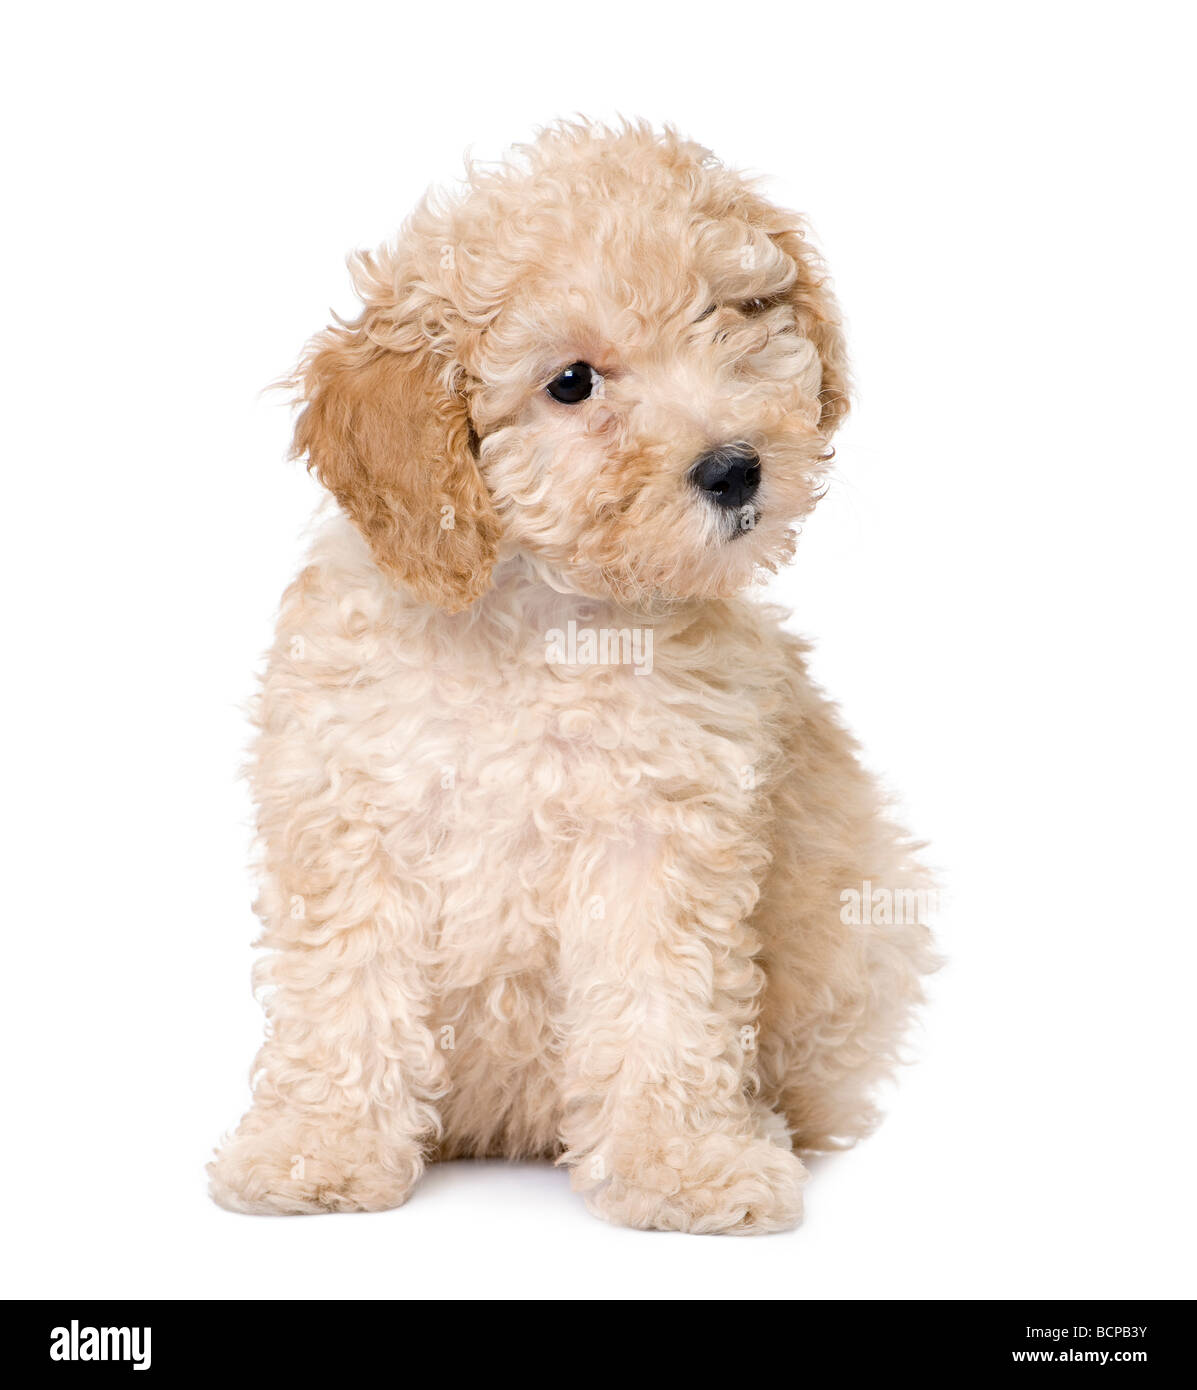 Apricot toy Poodle puppy siting, 9 weeks old, in front of a white background, studio shot Stock Photo